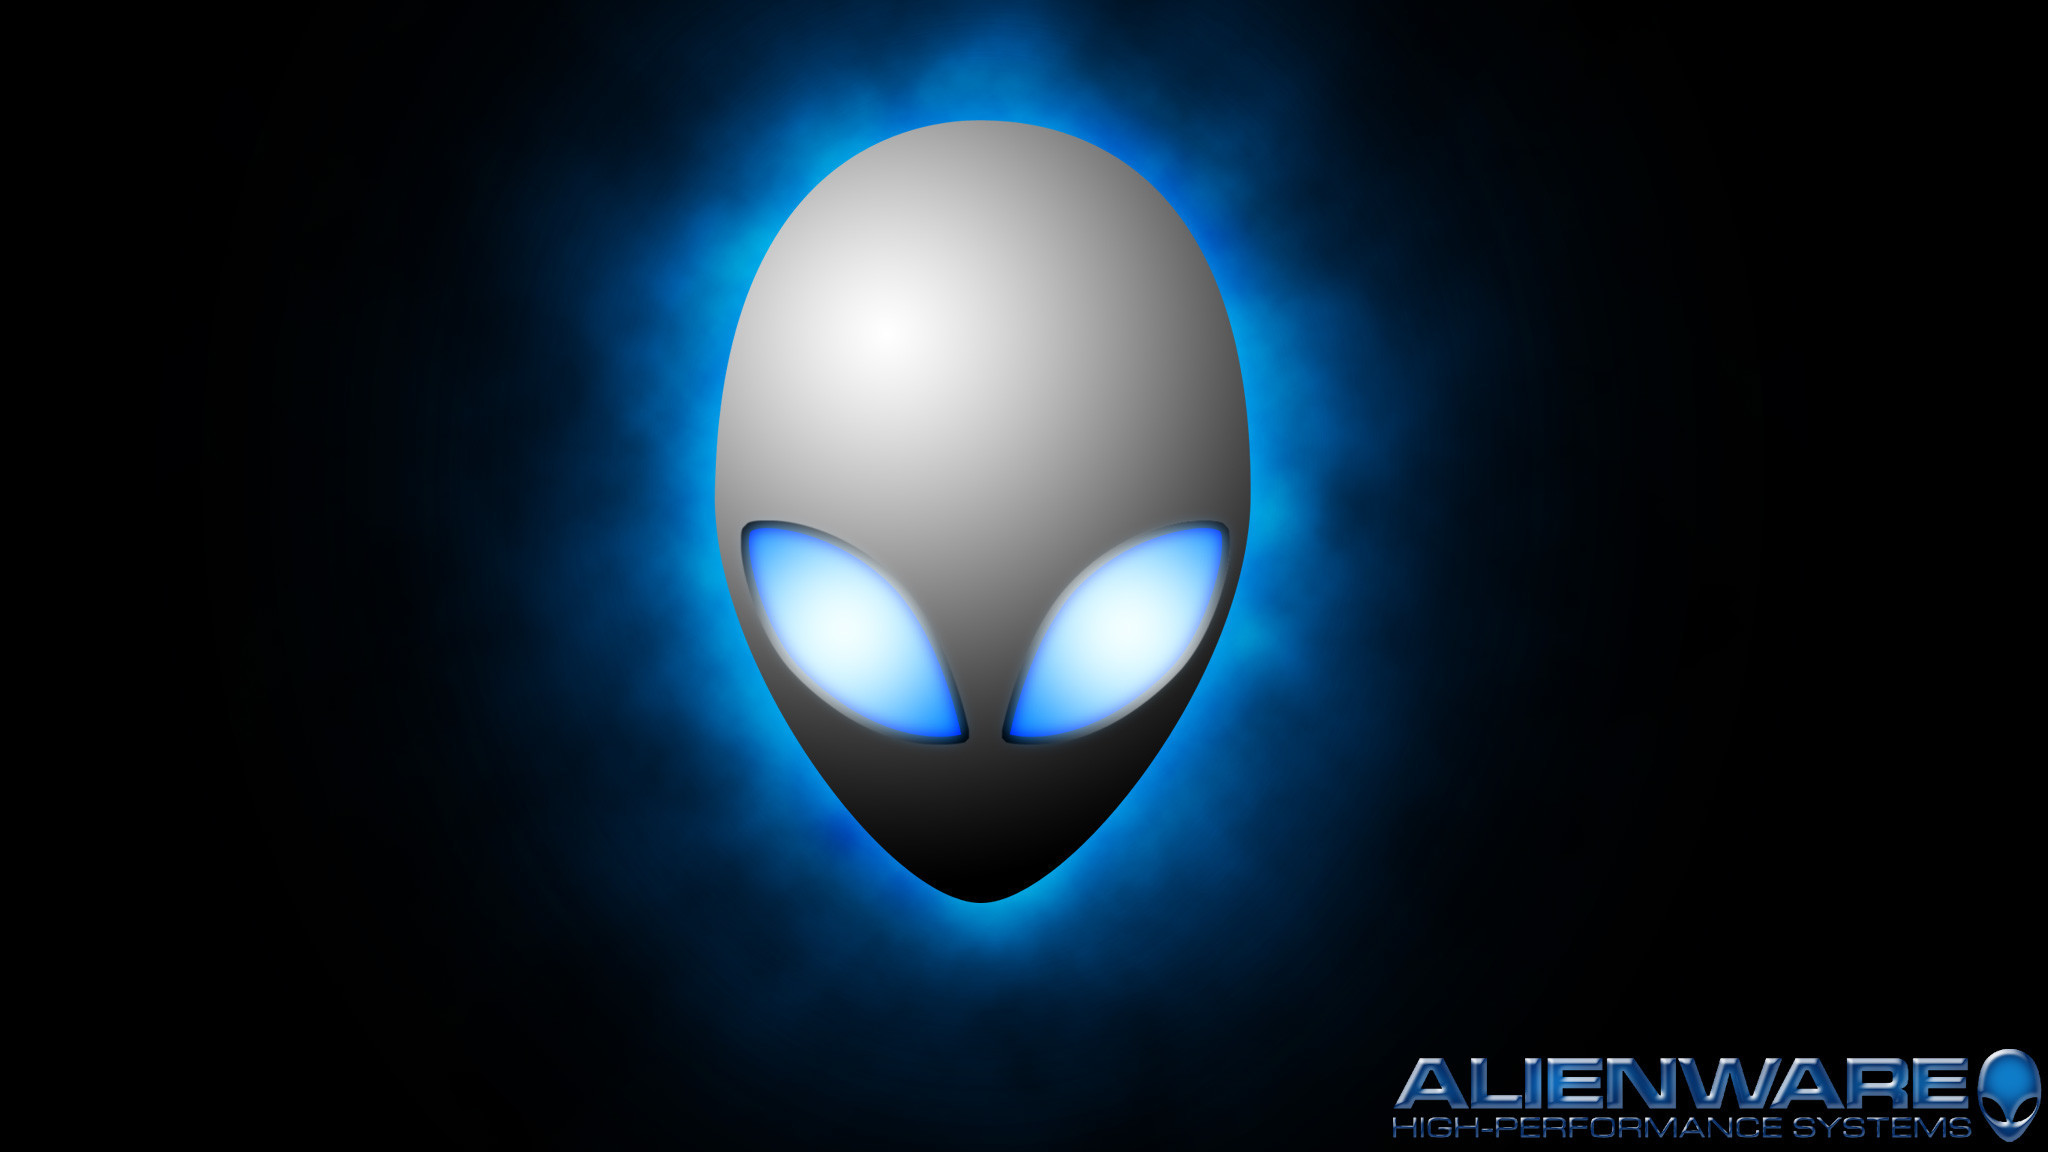 2048x1152  Black And Blue Alienware Wallpaper 17 Cool Hd Wallpaper. Black  And Blue Alienware Wallpaper